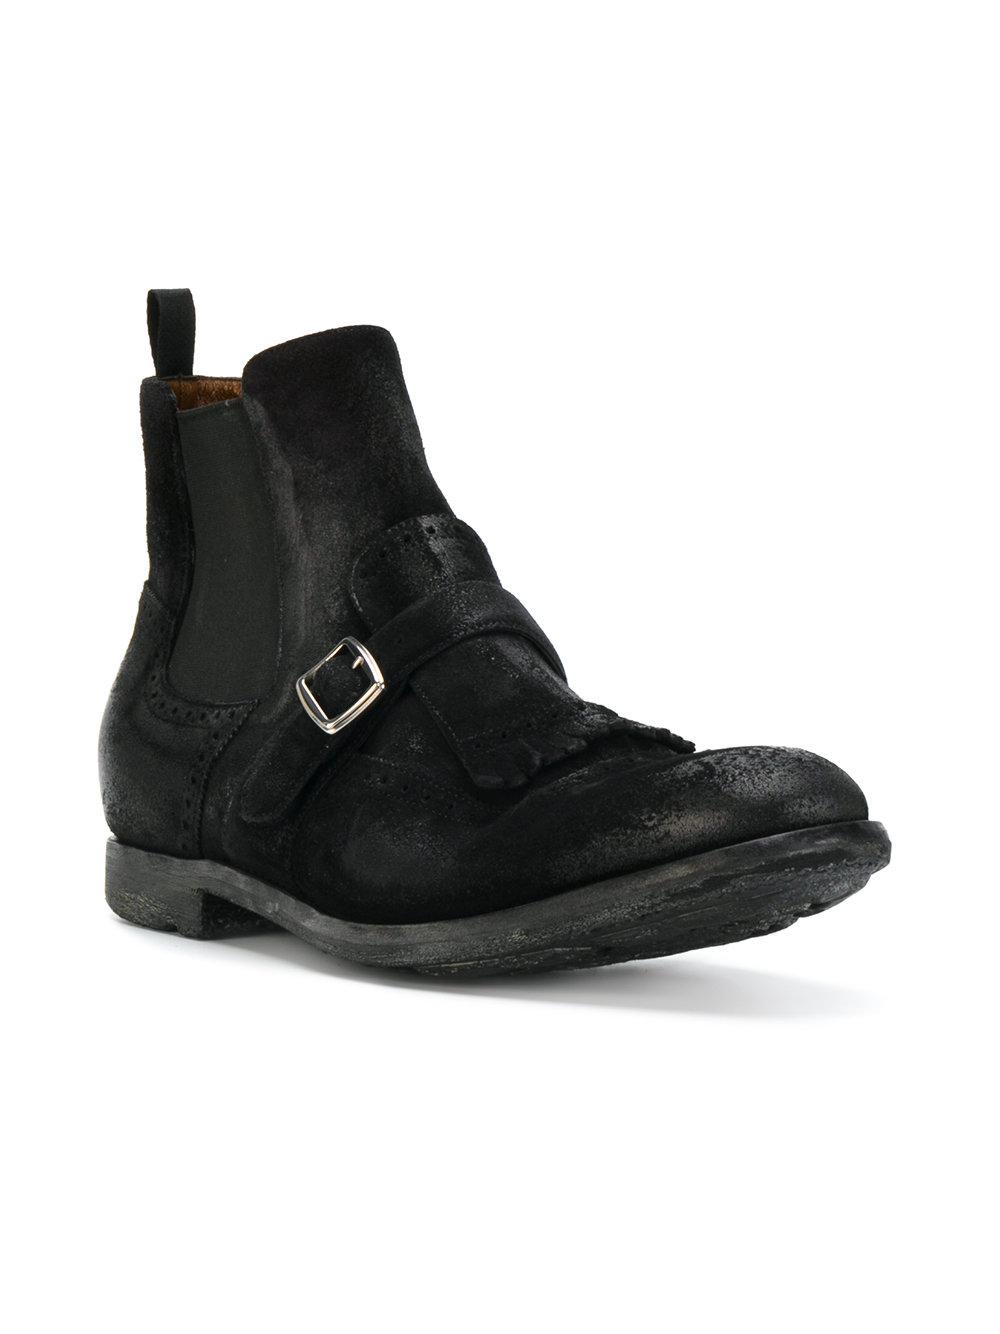 Lyst - Church'S Buckled Chelsea Boots in Black for Men